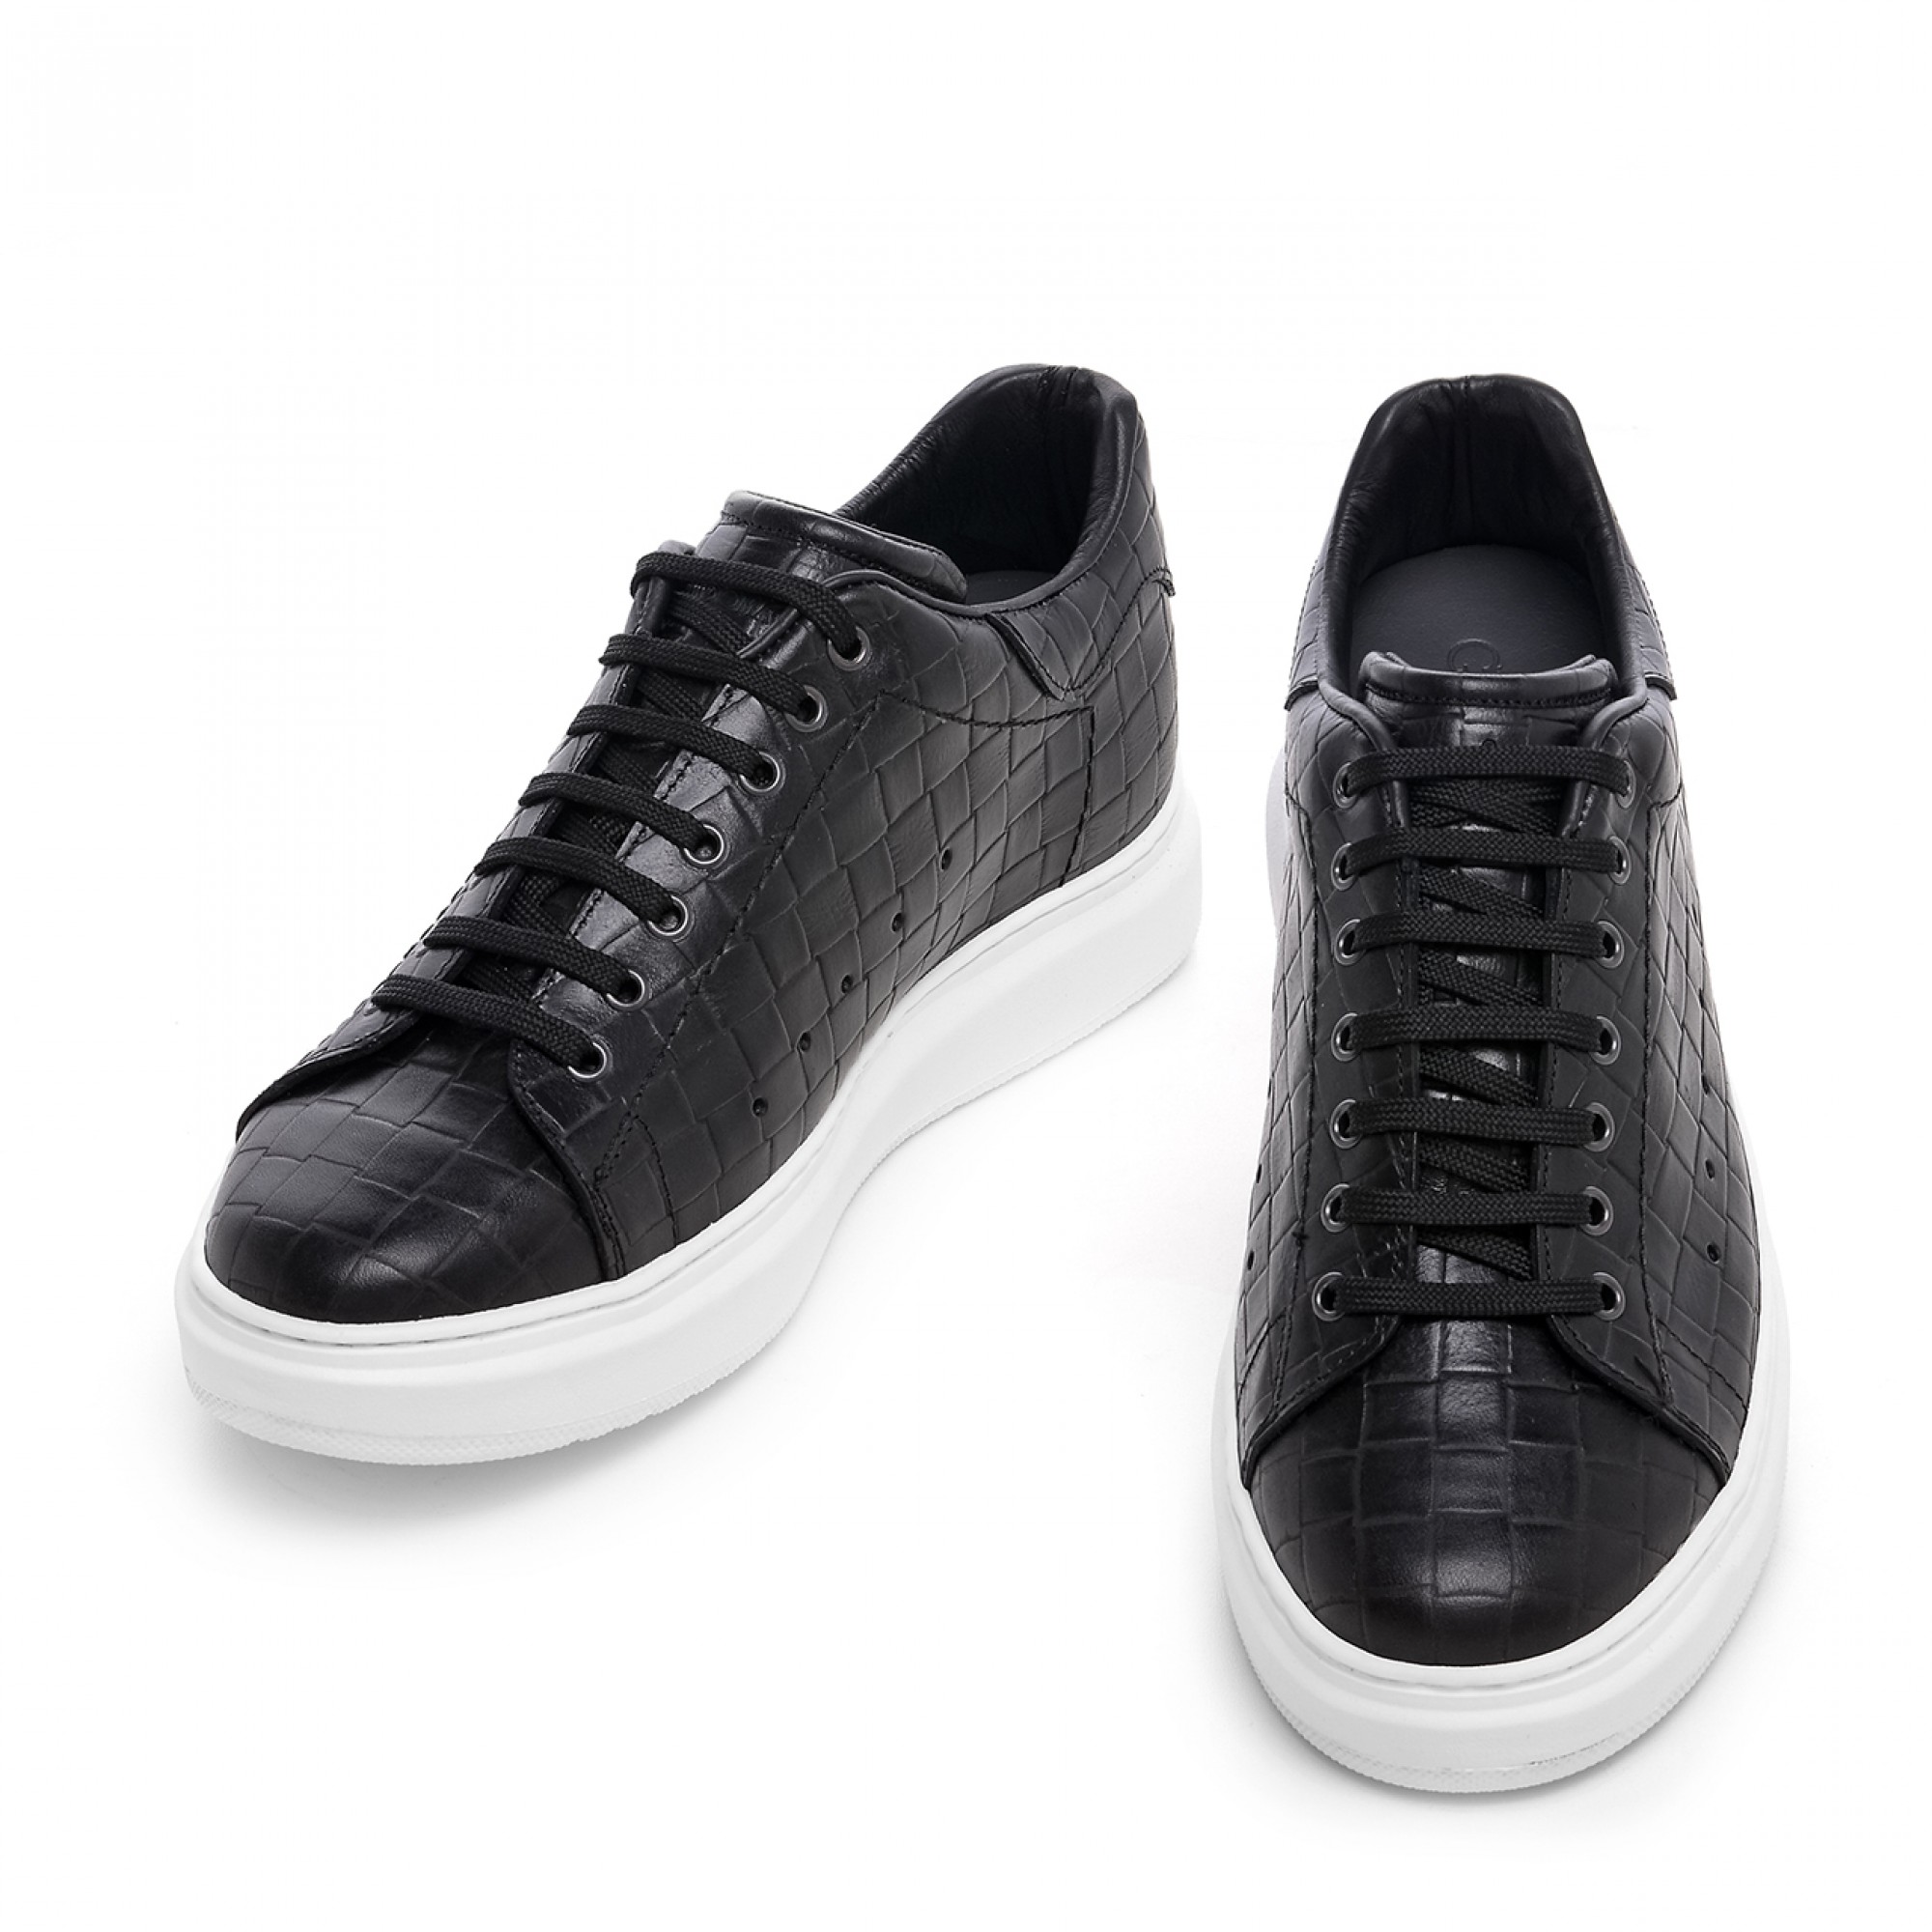 Mens Nubuck Leather Suede Trimmed Airsole Axel Arigato Sneakers Full Grain  Low Top Trainers For Casual And Running Wear From Daiyu22, $86 | DHgate.Com